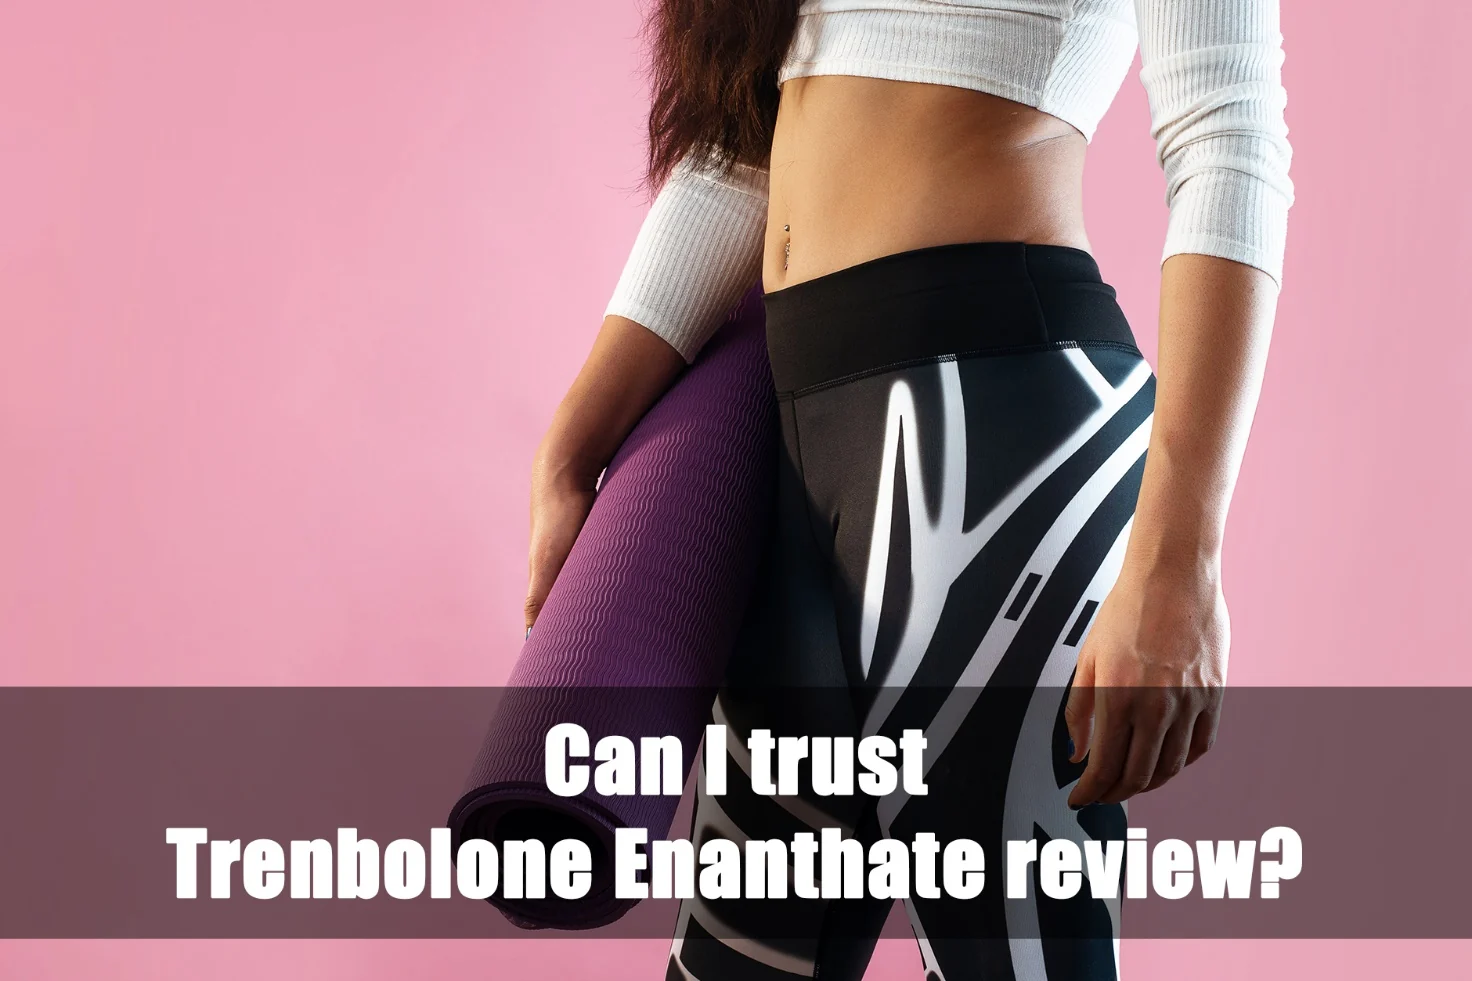 Trenbolone Enanthate review